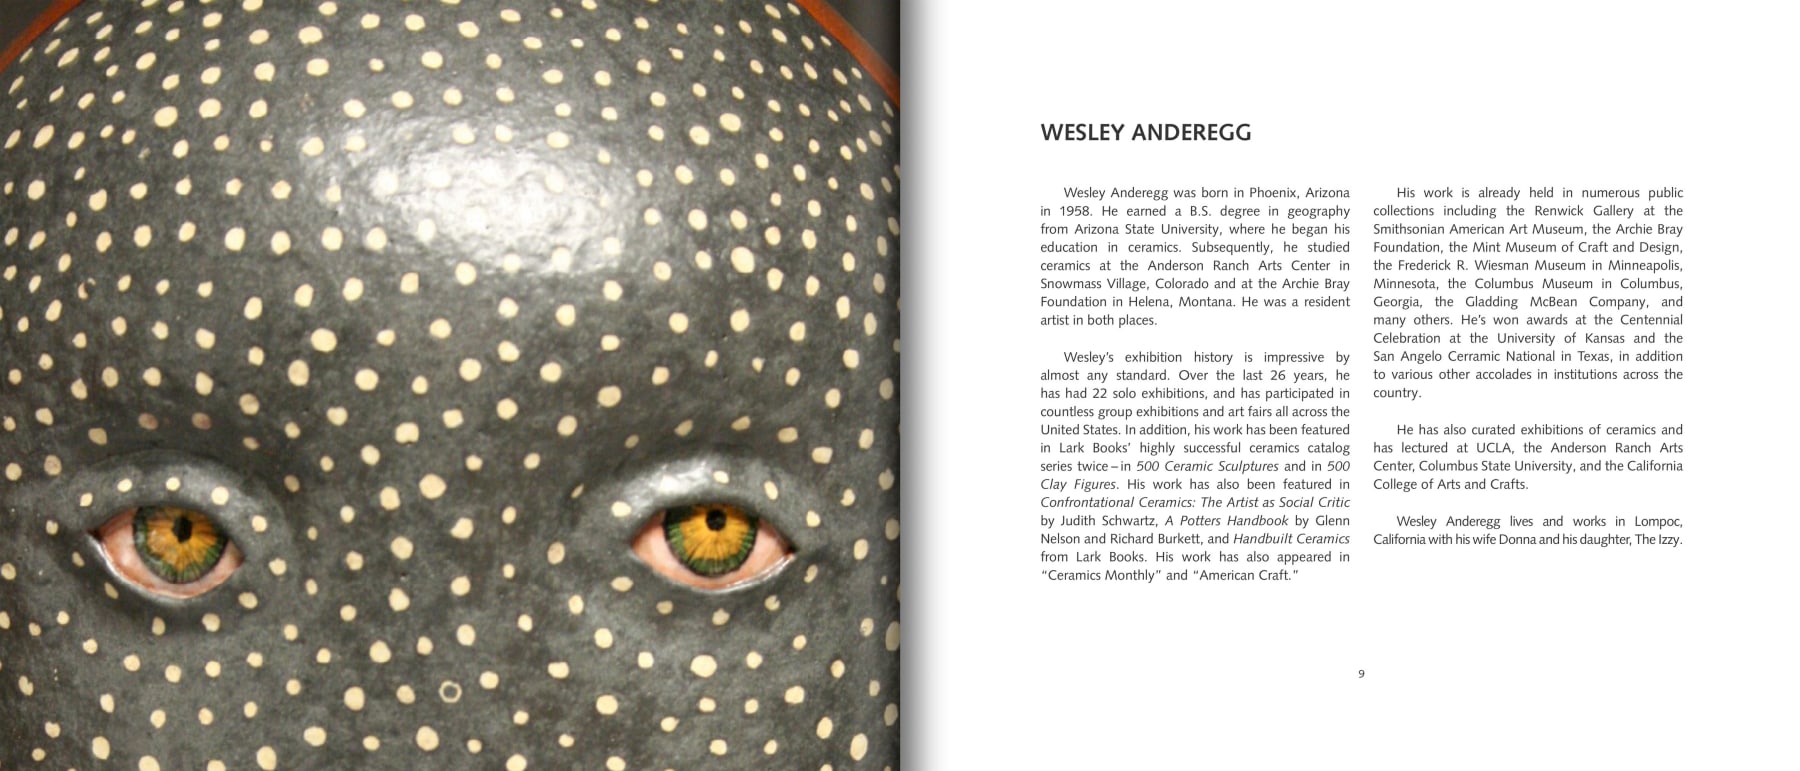 Pages 8 and 9 of JUST BETWEEN US: Wesley Anderegg, Rafael Perea de la Cabada, and Maria Rendon with brief biography about Wesley Anderegg